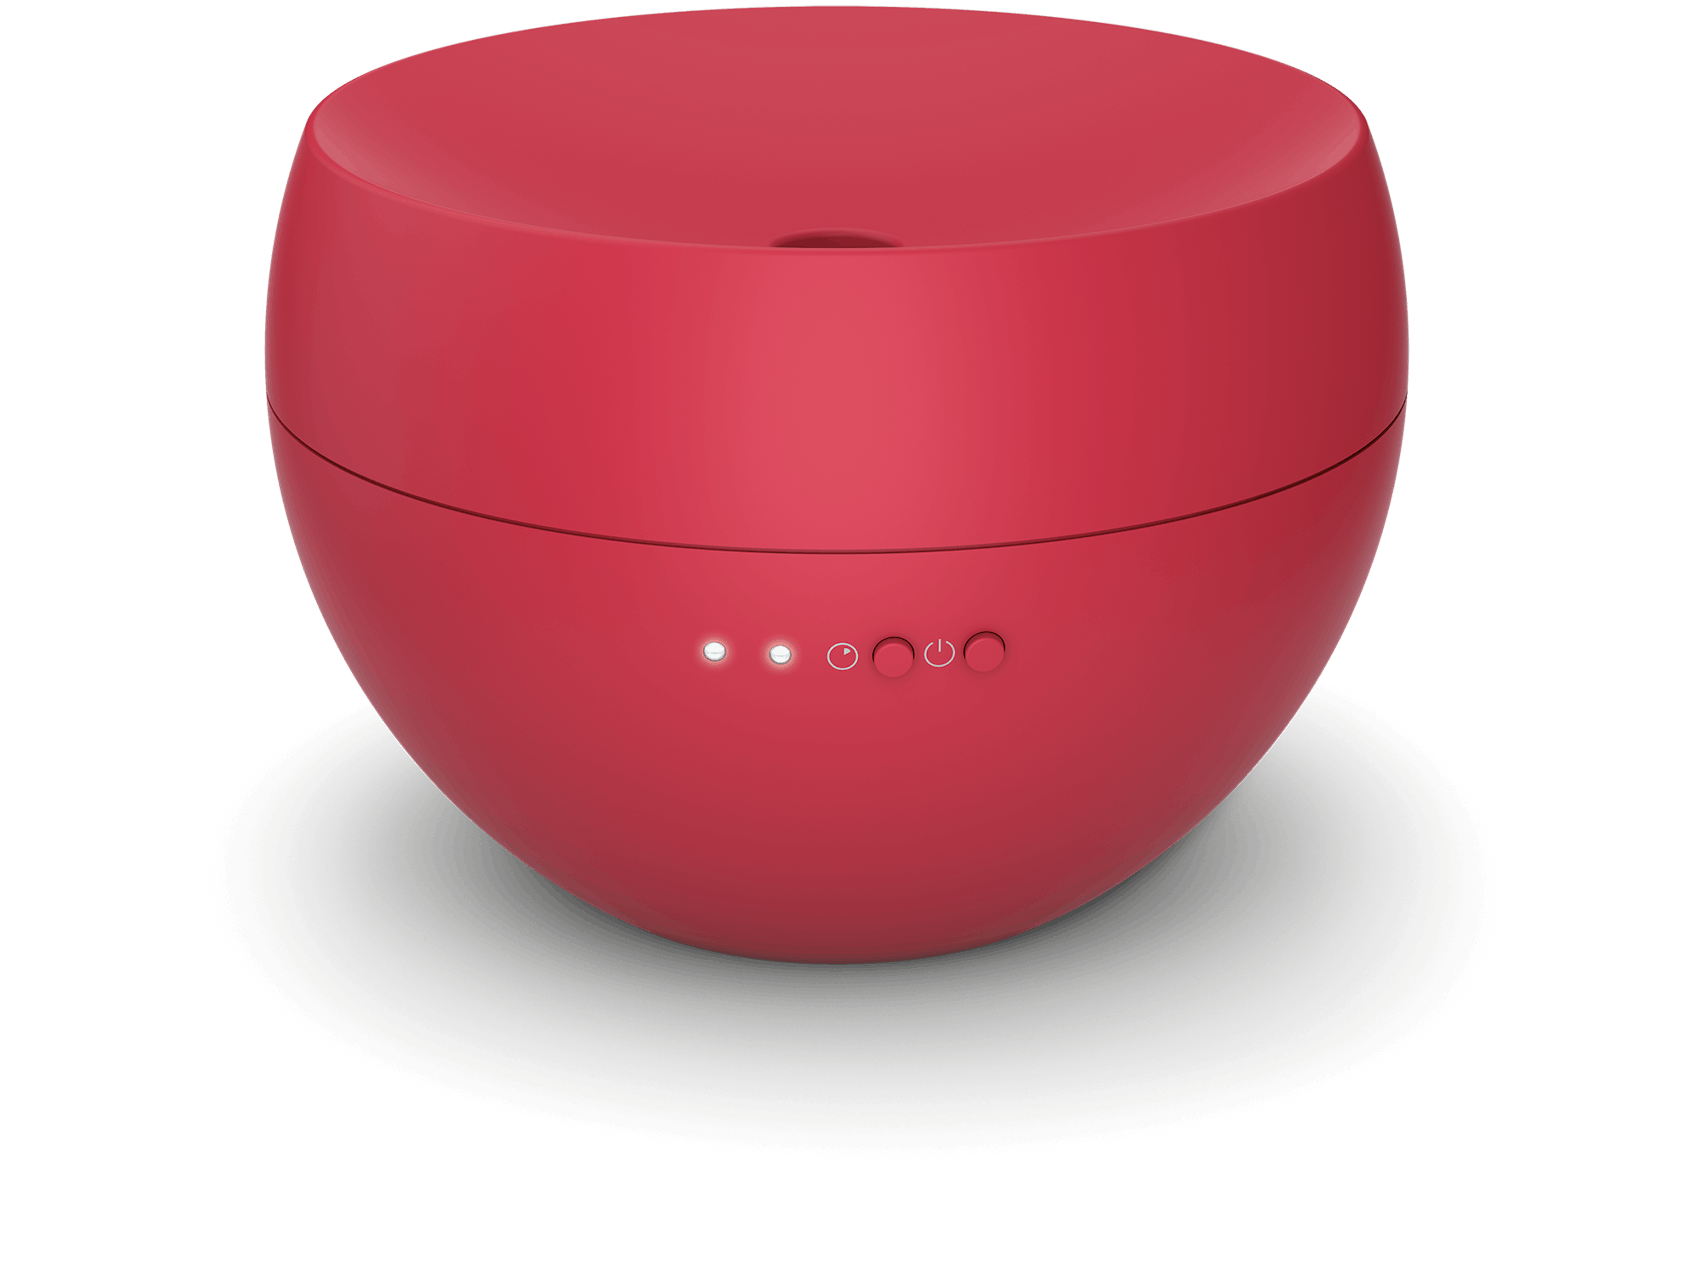 Jasmin aroma diffuser by Stadler Form in chili red as perspective view